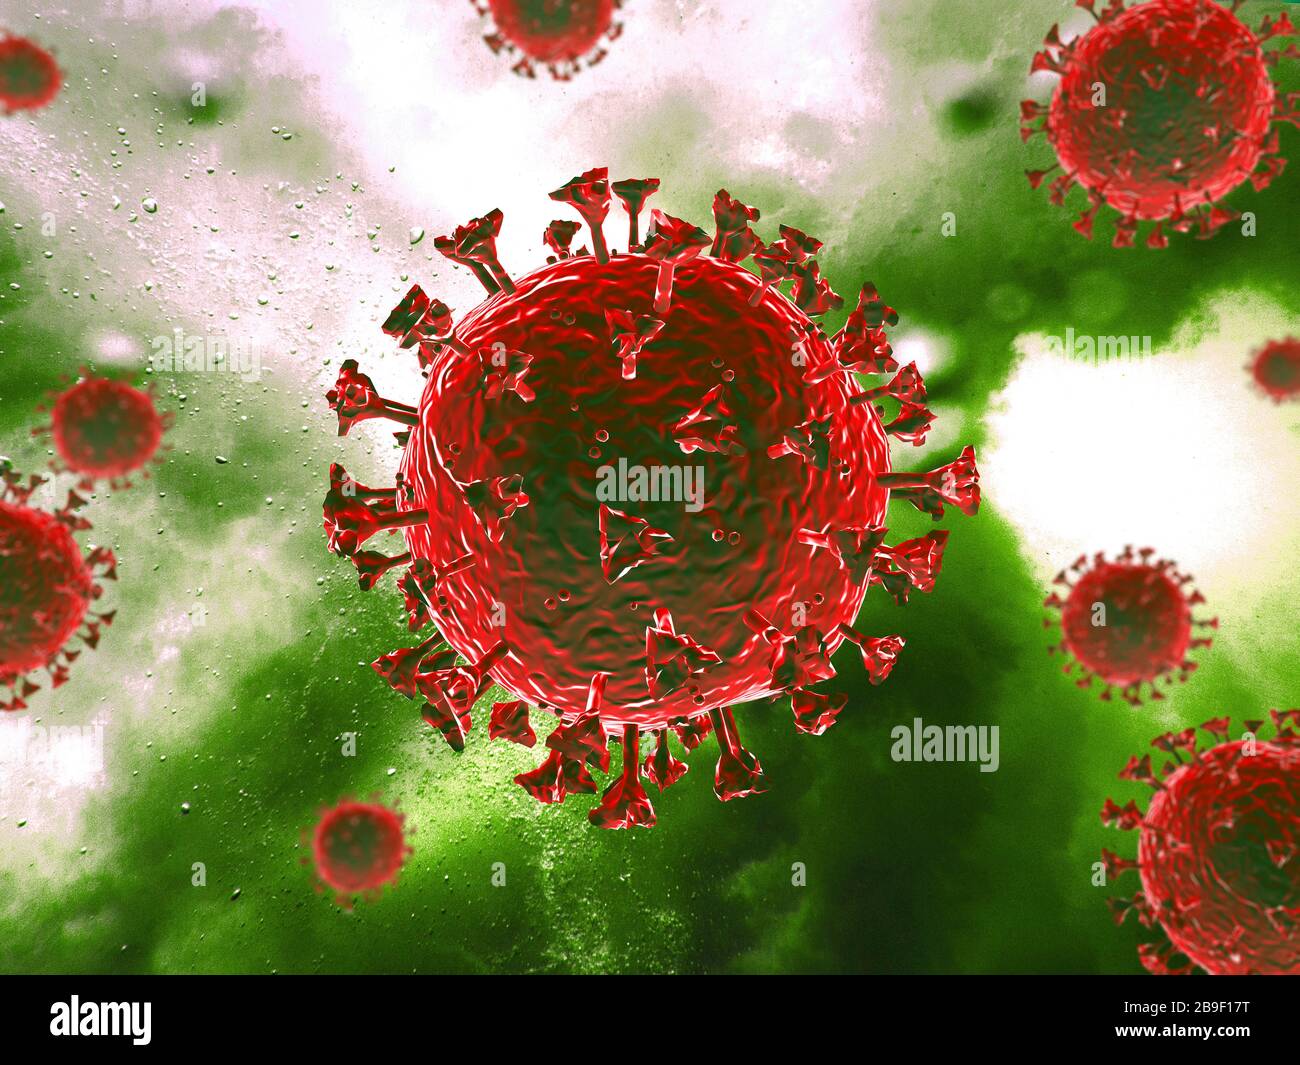 3D illustration of a red colored coronavirus on a green background. Stock Photo